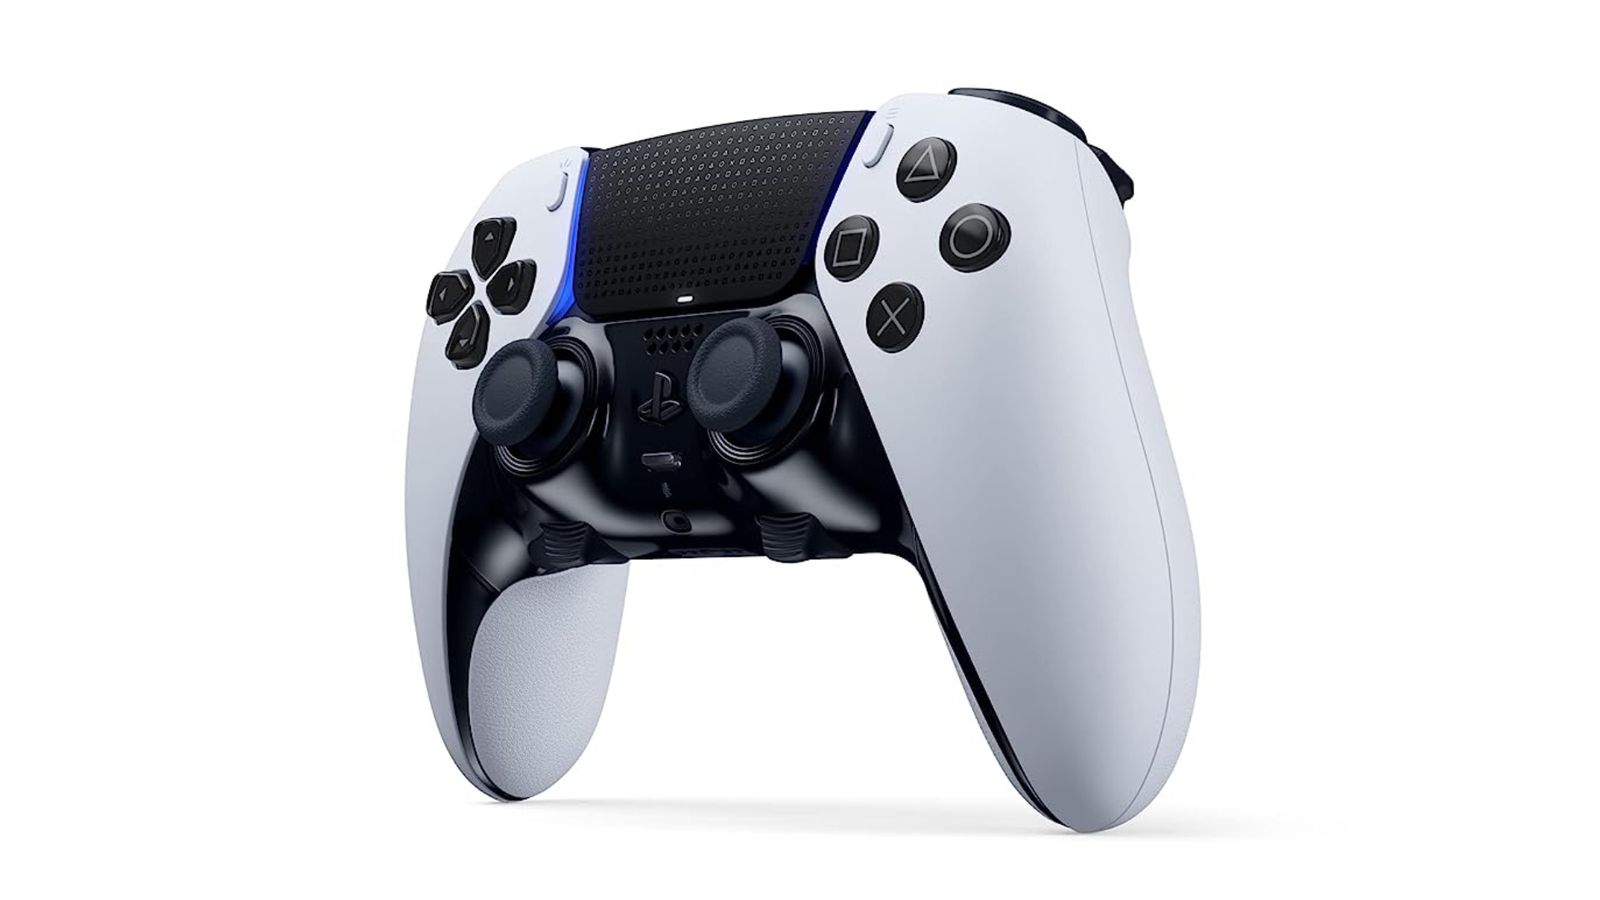 DualSense Edge product image of a white and black PS5 controller featuring blue lighting.